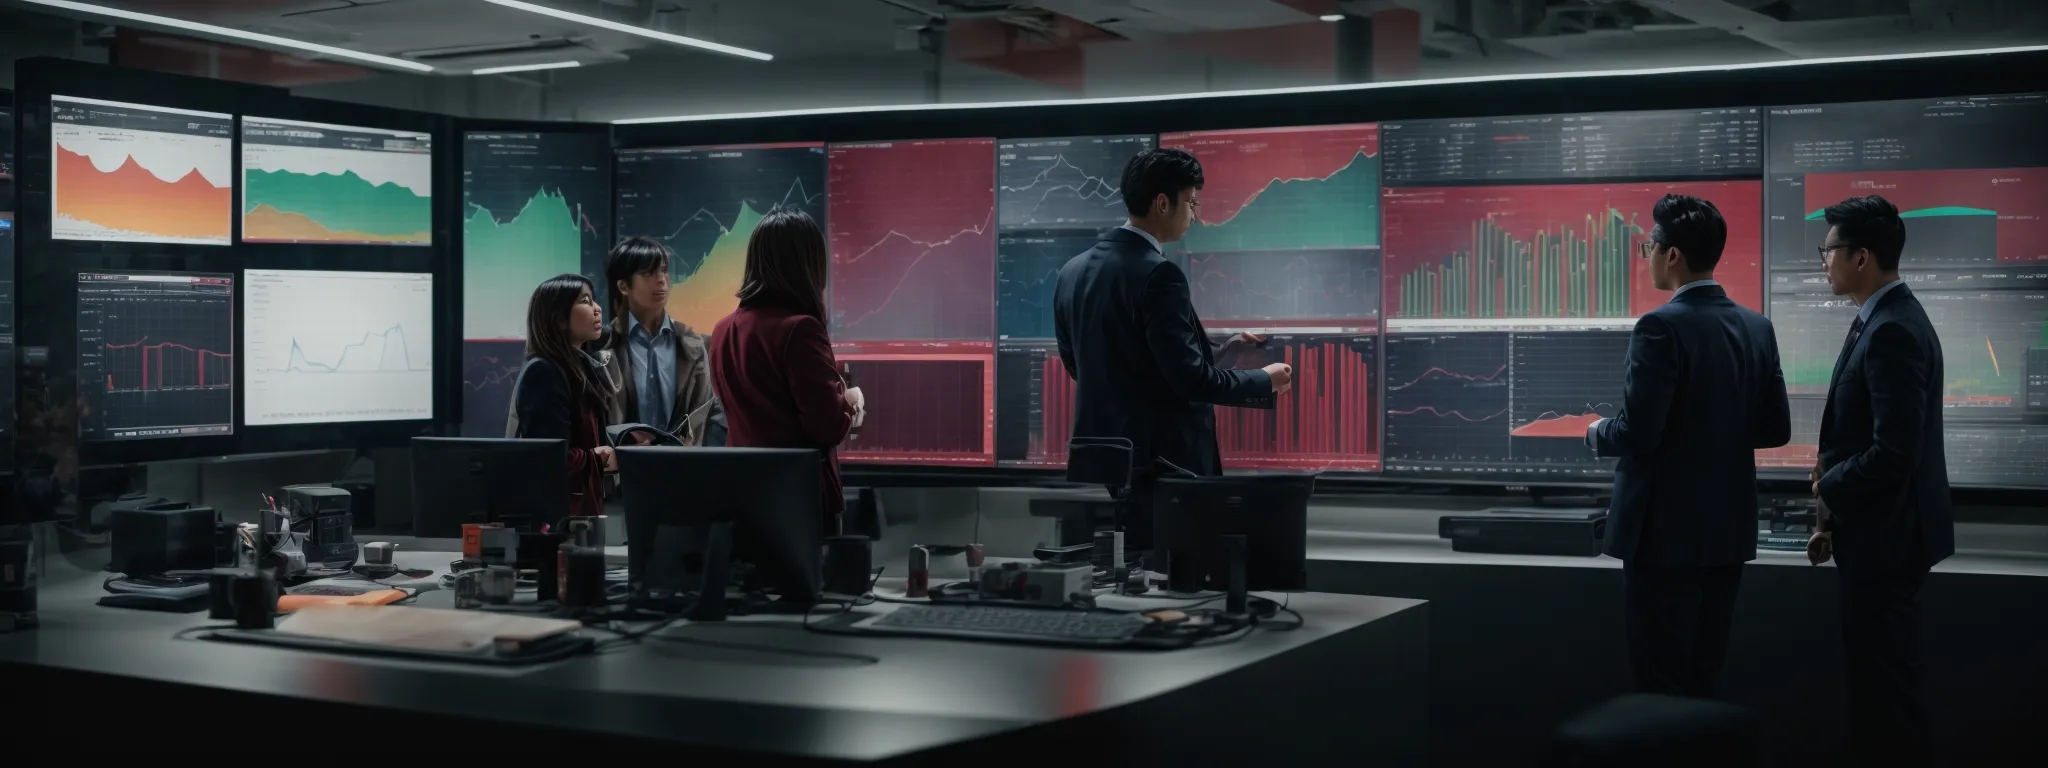 a group of professionals gathered around a large dashboard display analyzing colorful graphs and charts.